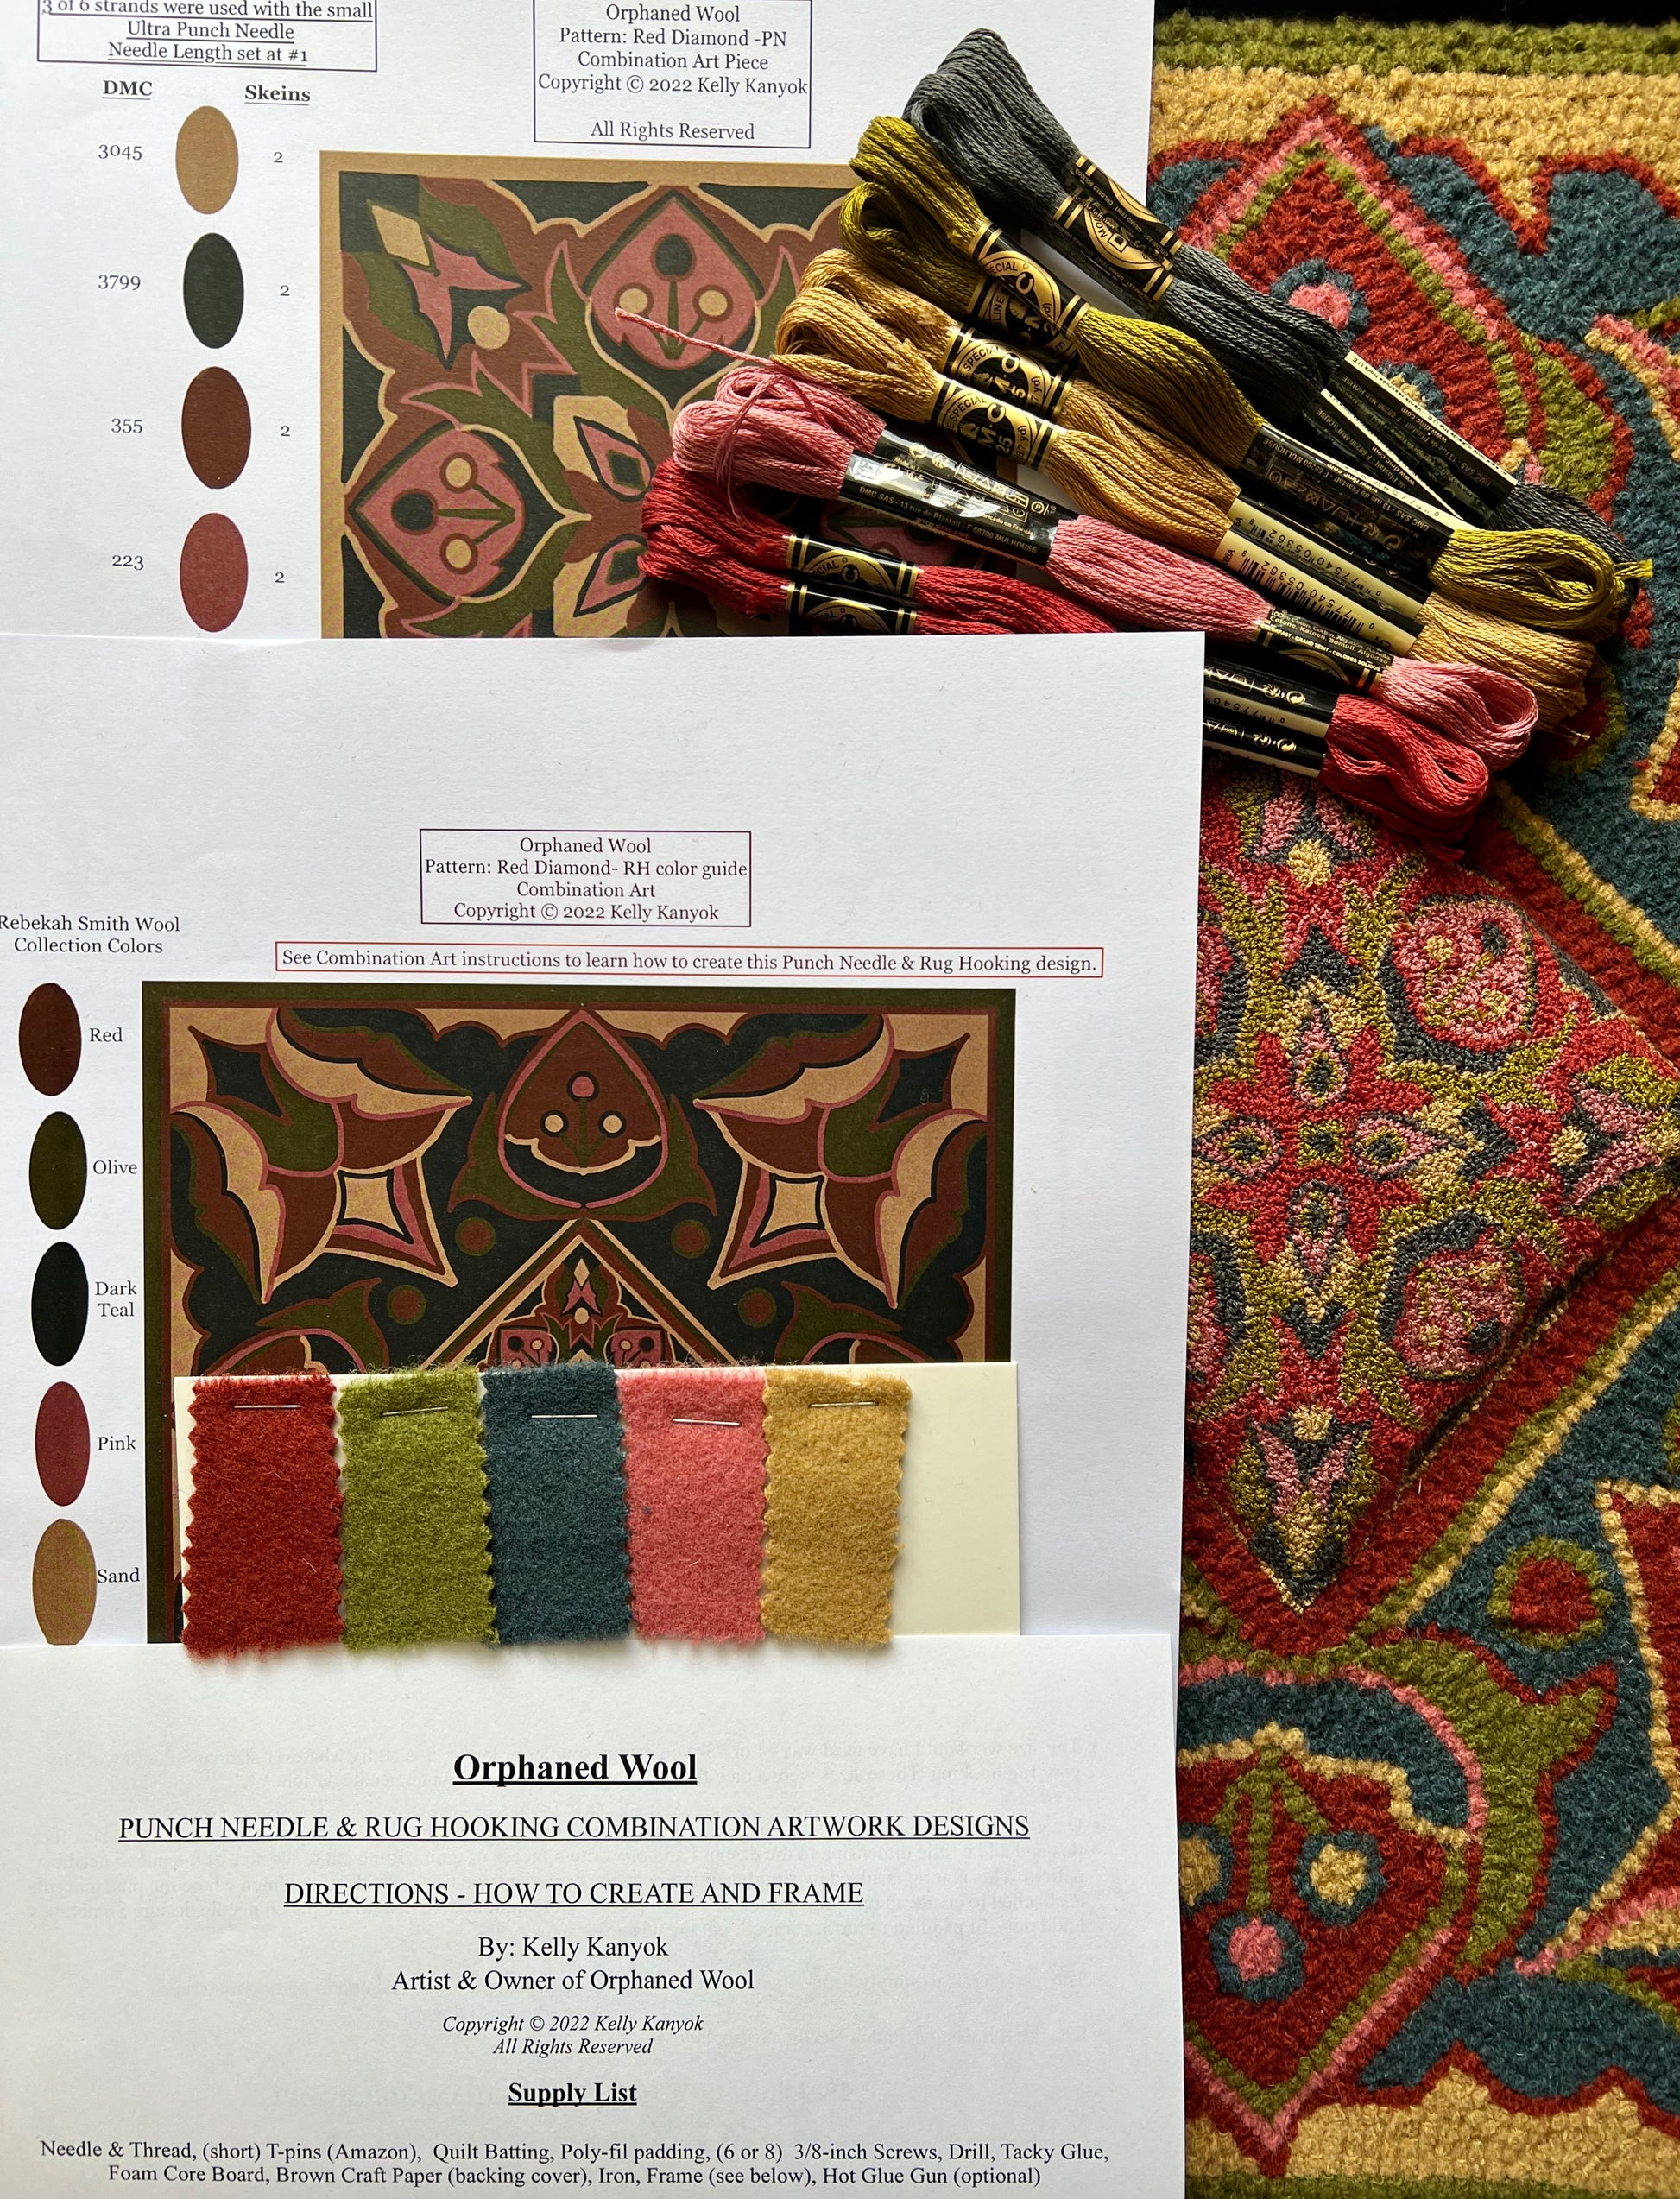 rug hooking and punch needle supplies